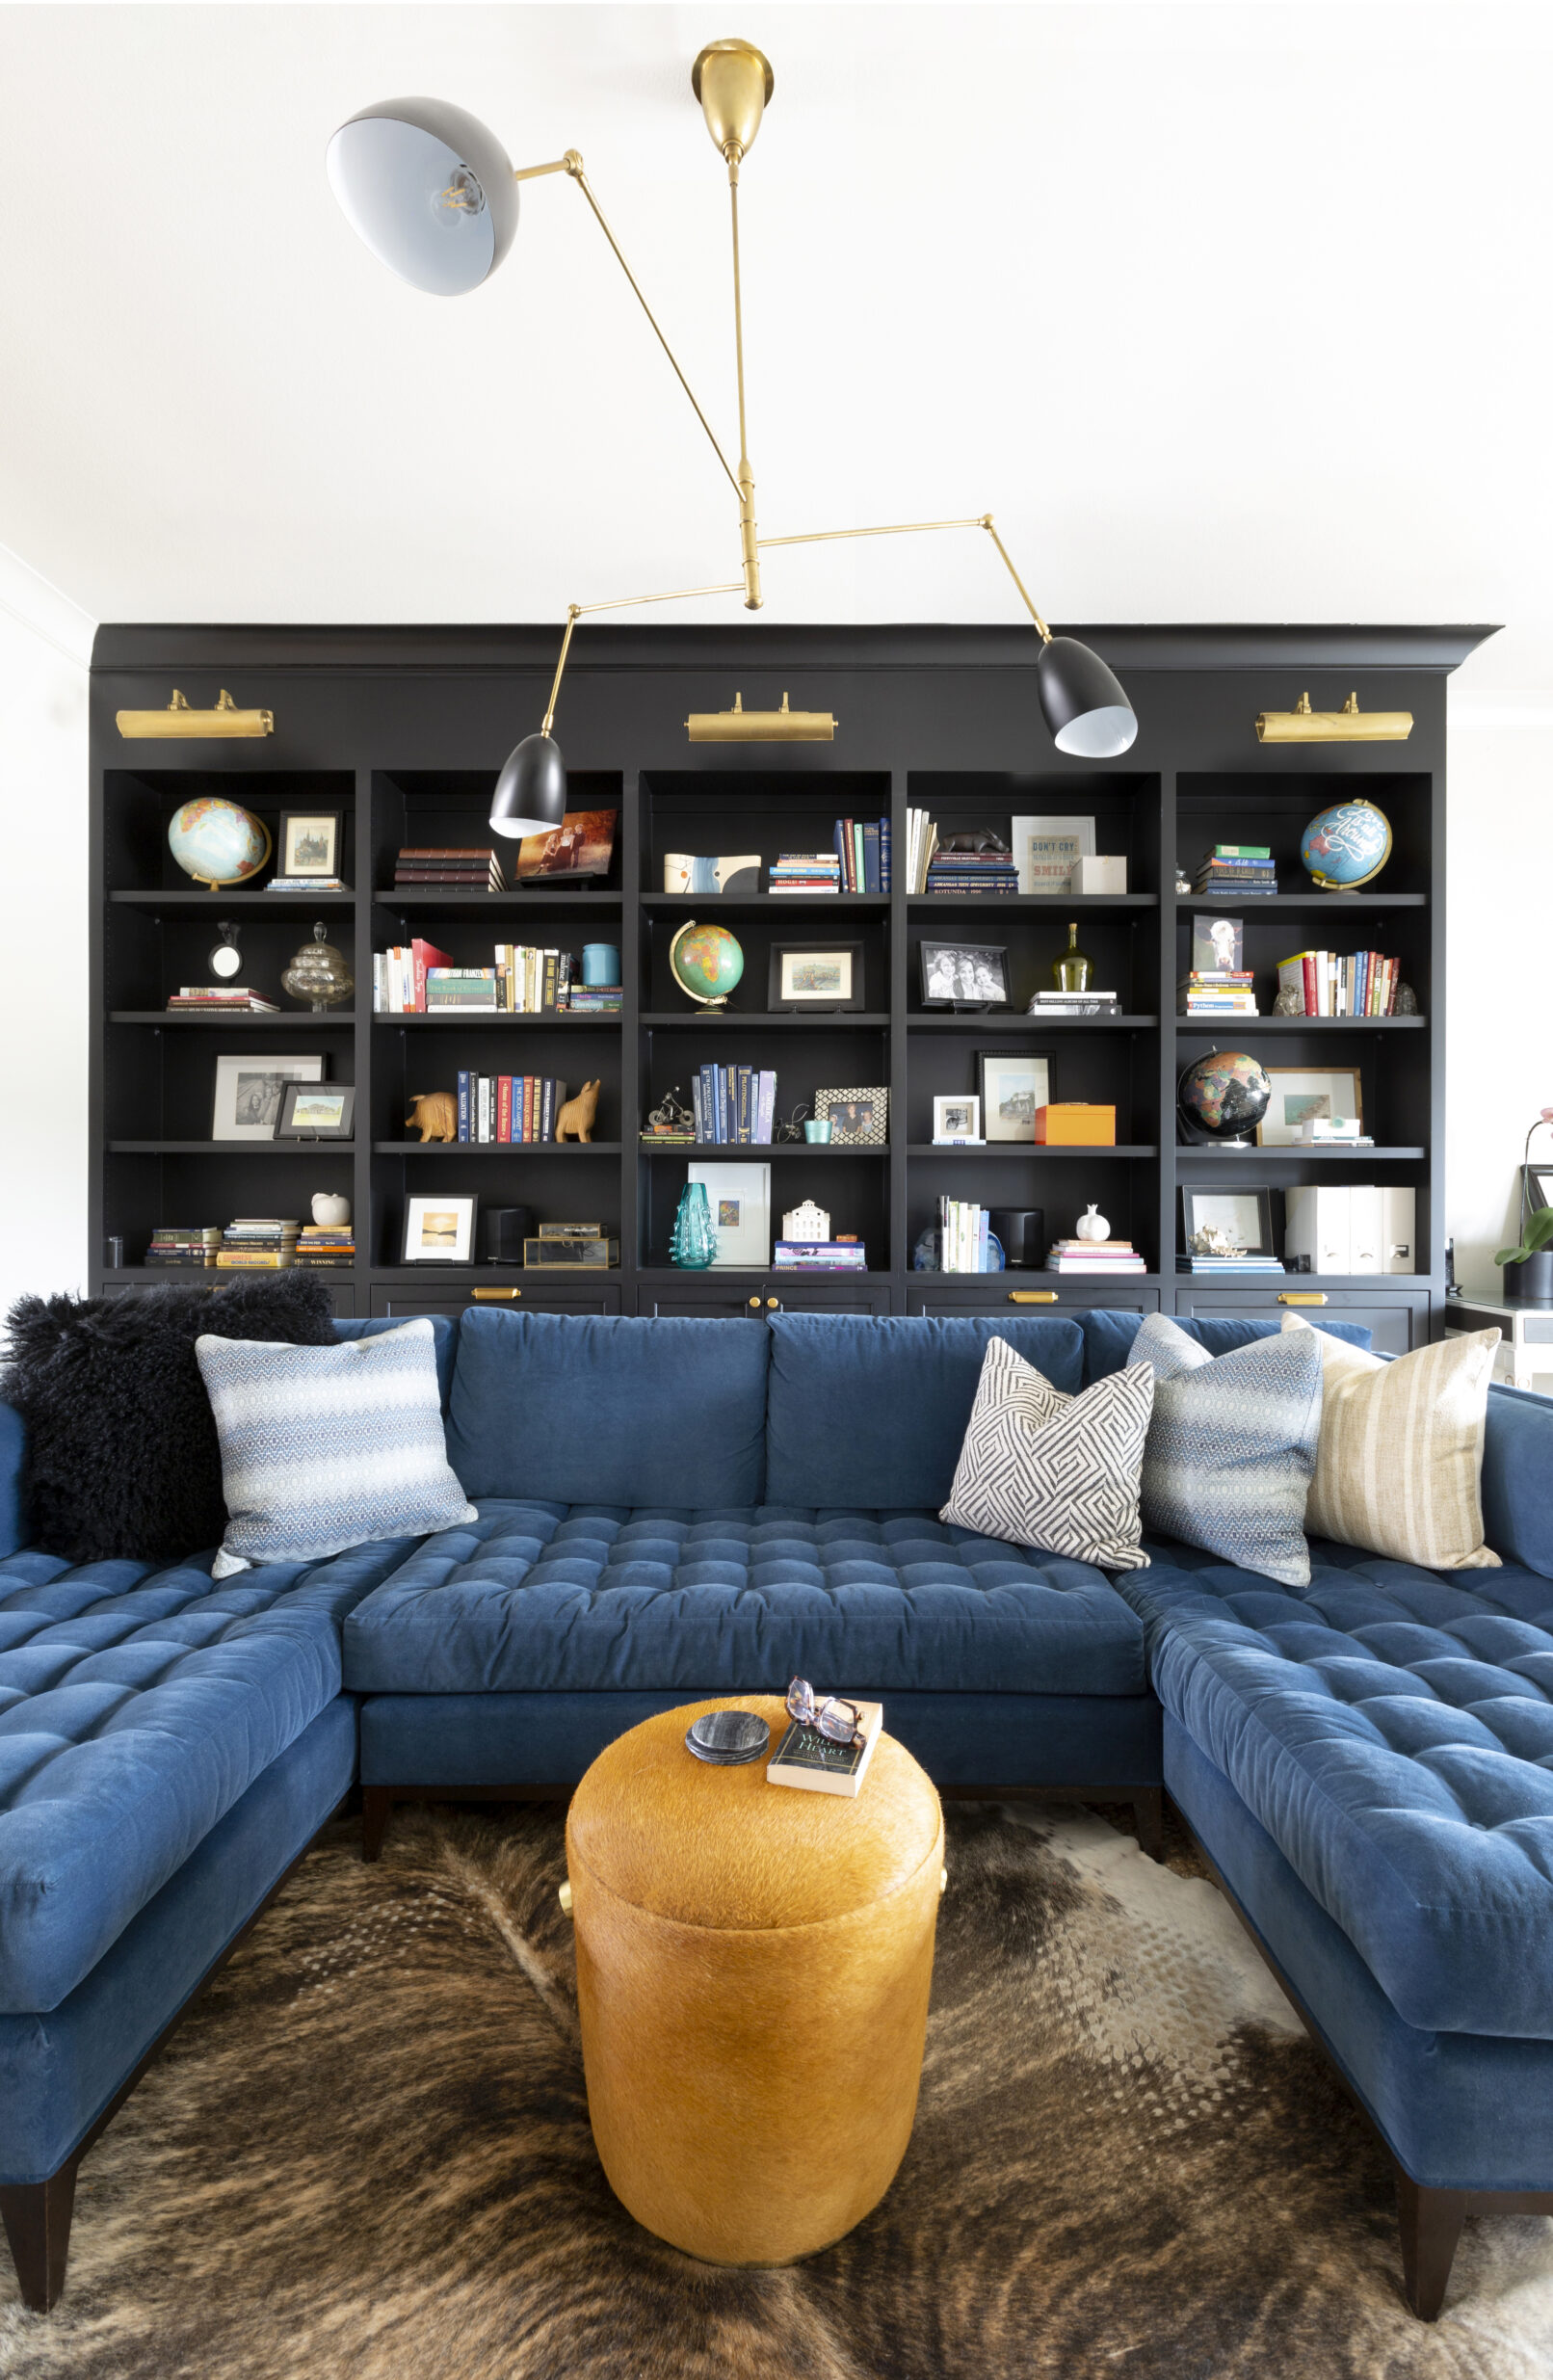 Interior of a living room with a blue couch, black bookshelves and a large funky light fixture.